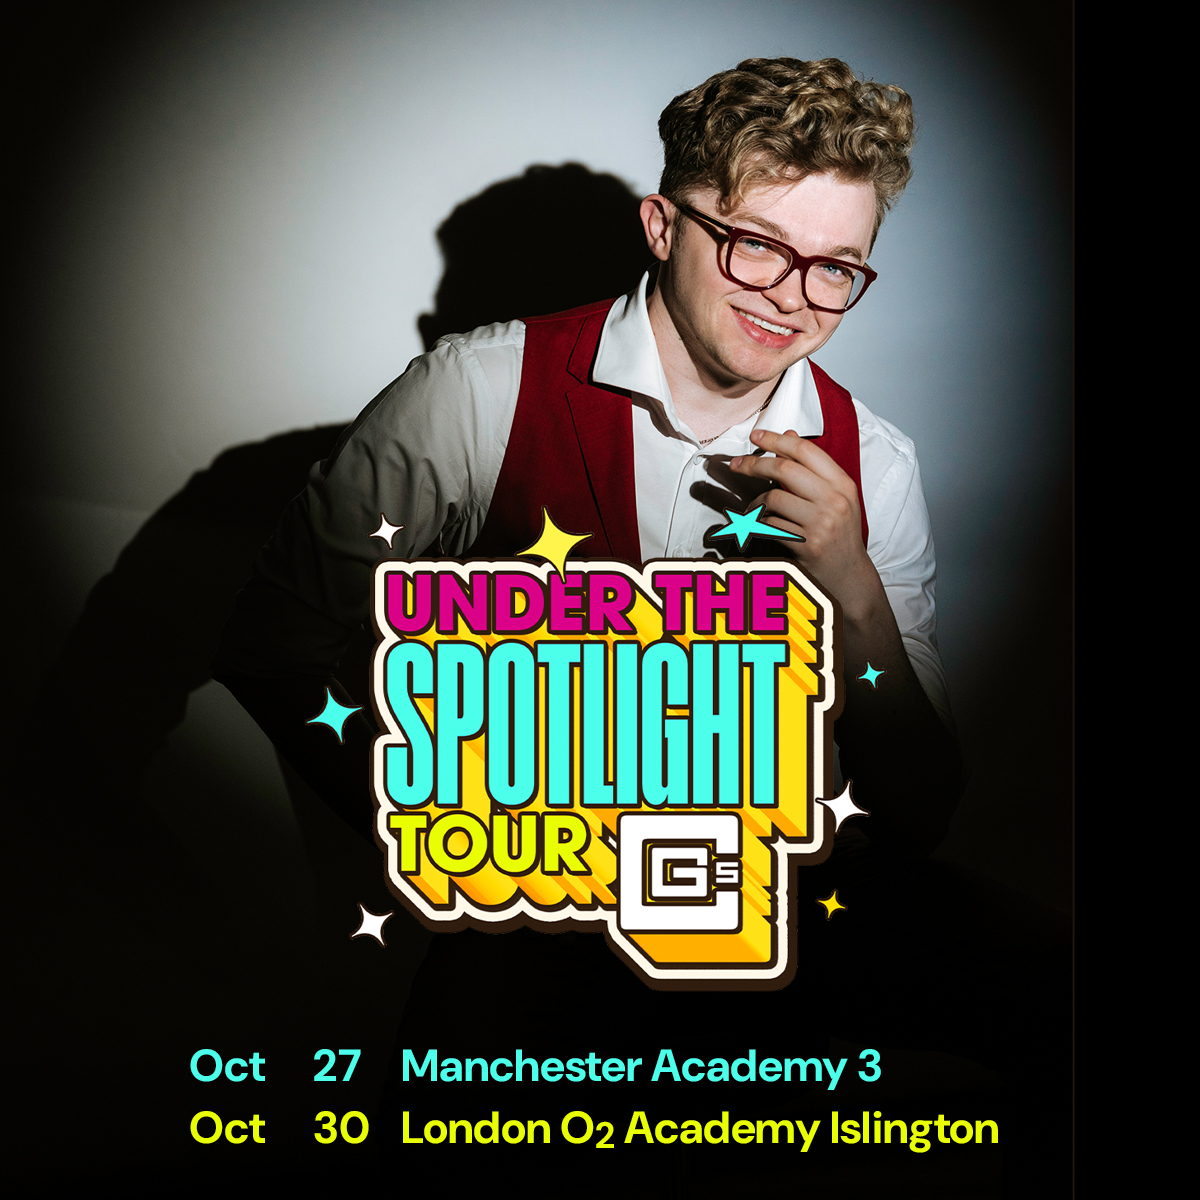 Online sensation @cg5beats is bringing the Under the Spotlight Tour to Manchester and London this October! Tickets on sale now 🎟️ tix.to/CG5